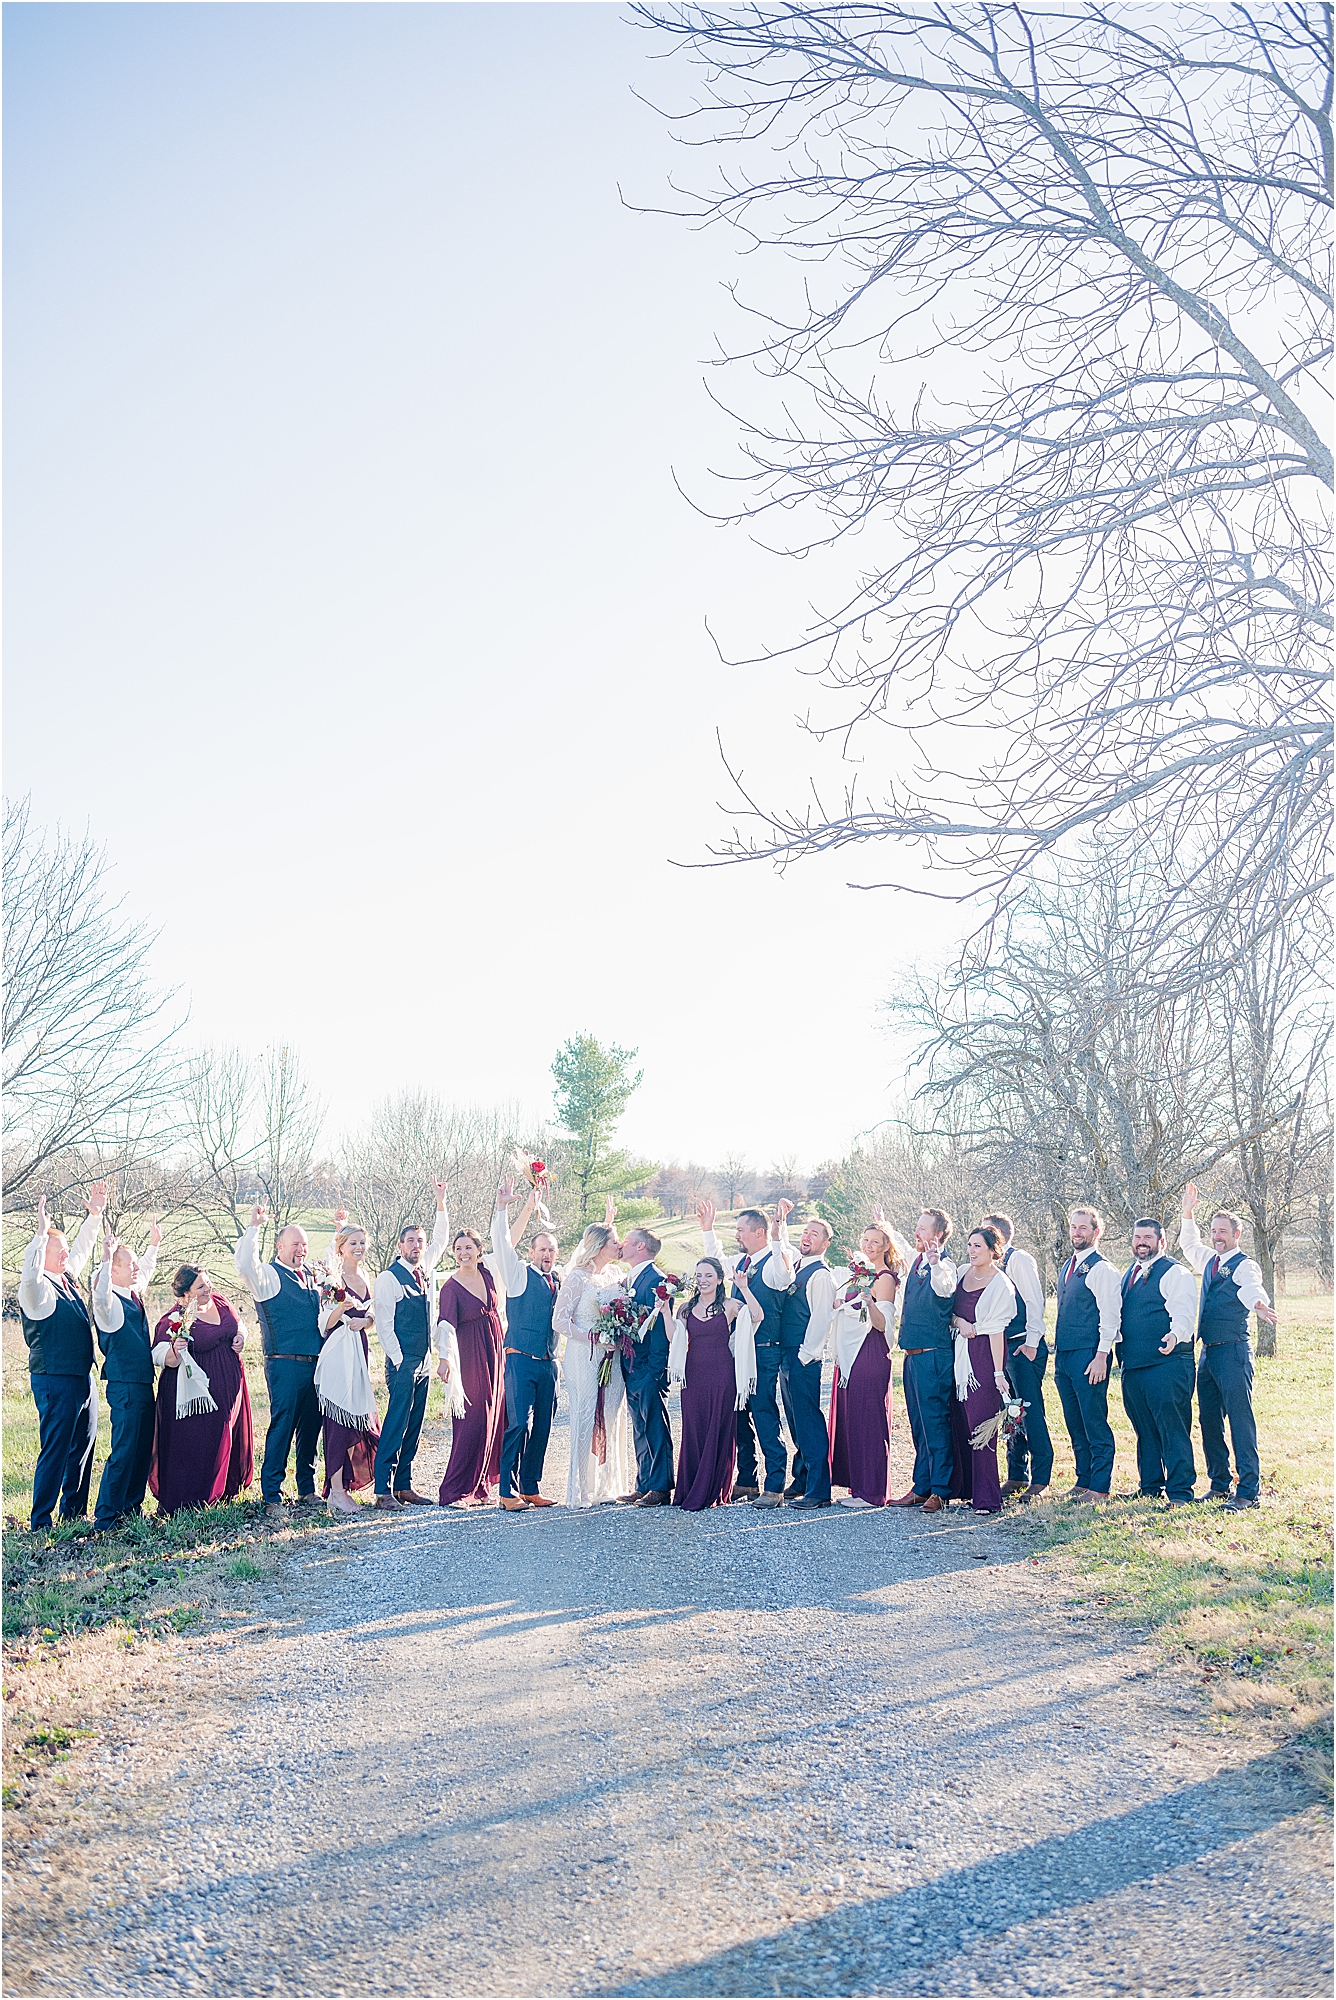 Wedding day timeline tips for a photography friendly day | Missouri wedding photographer | Light + Airy wedding photography | Kelsey Alumbaugh Photography | #kcwedding #kansascityweddingphotography #kcweddingphotos #missouriwedding